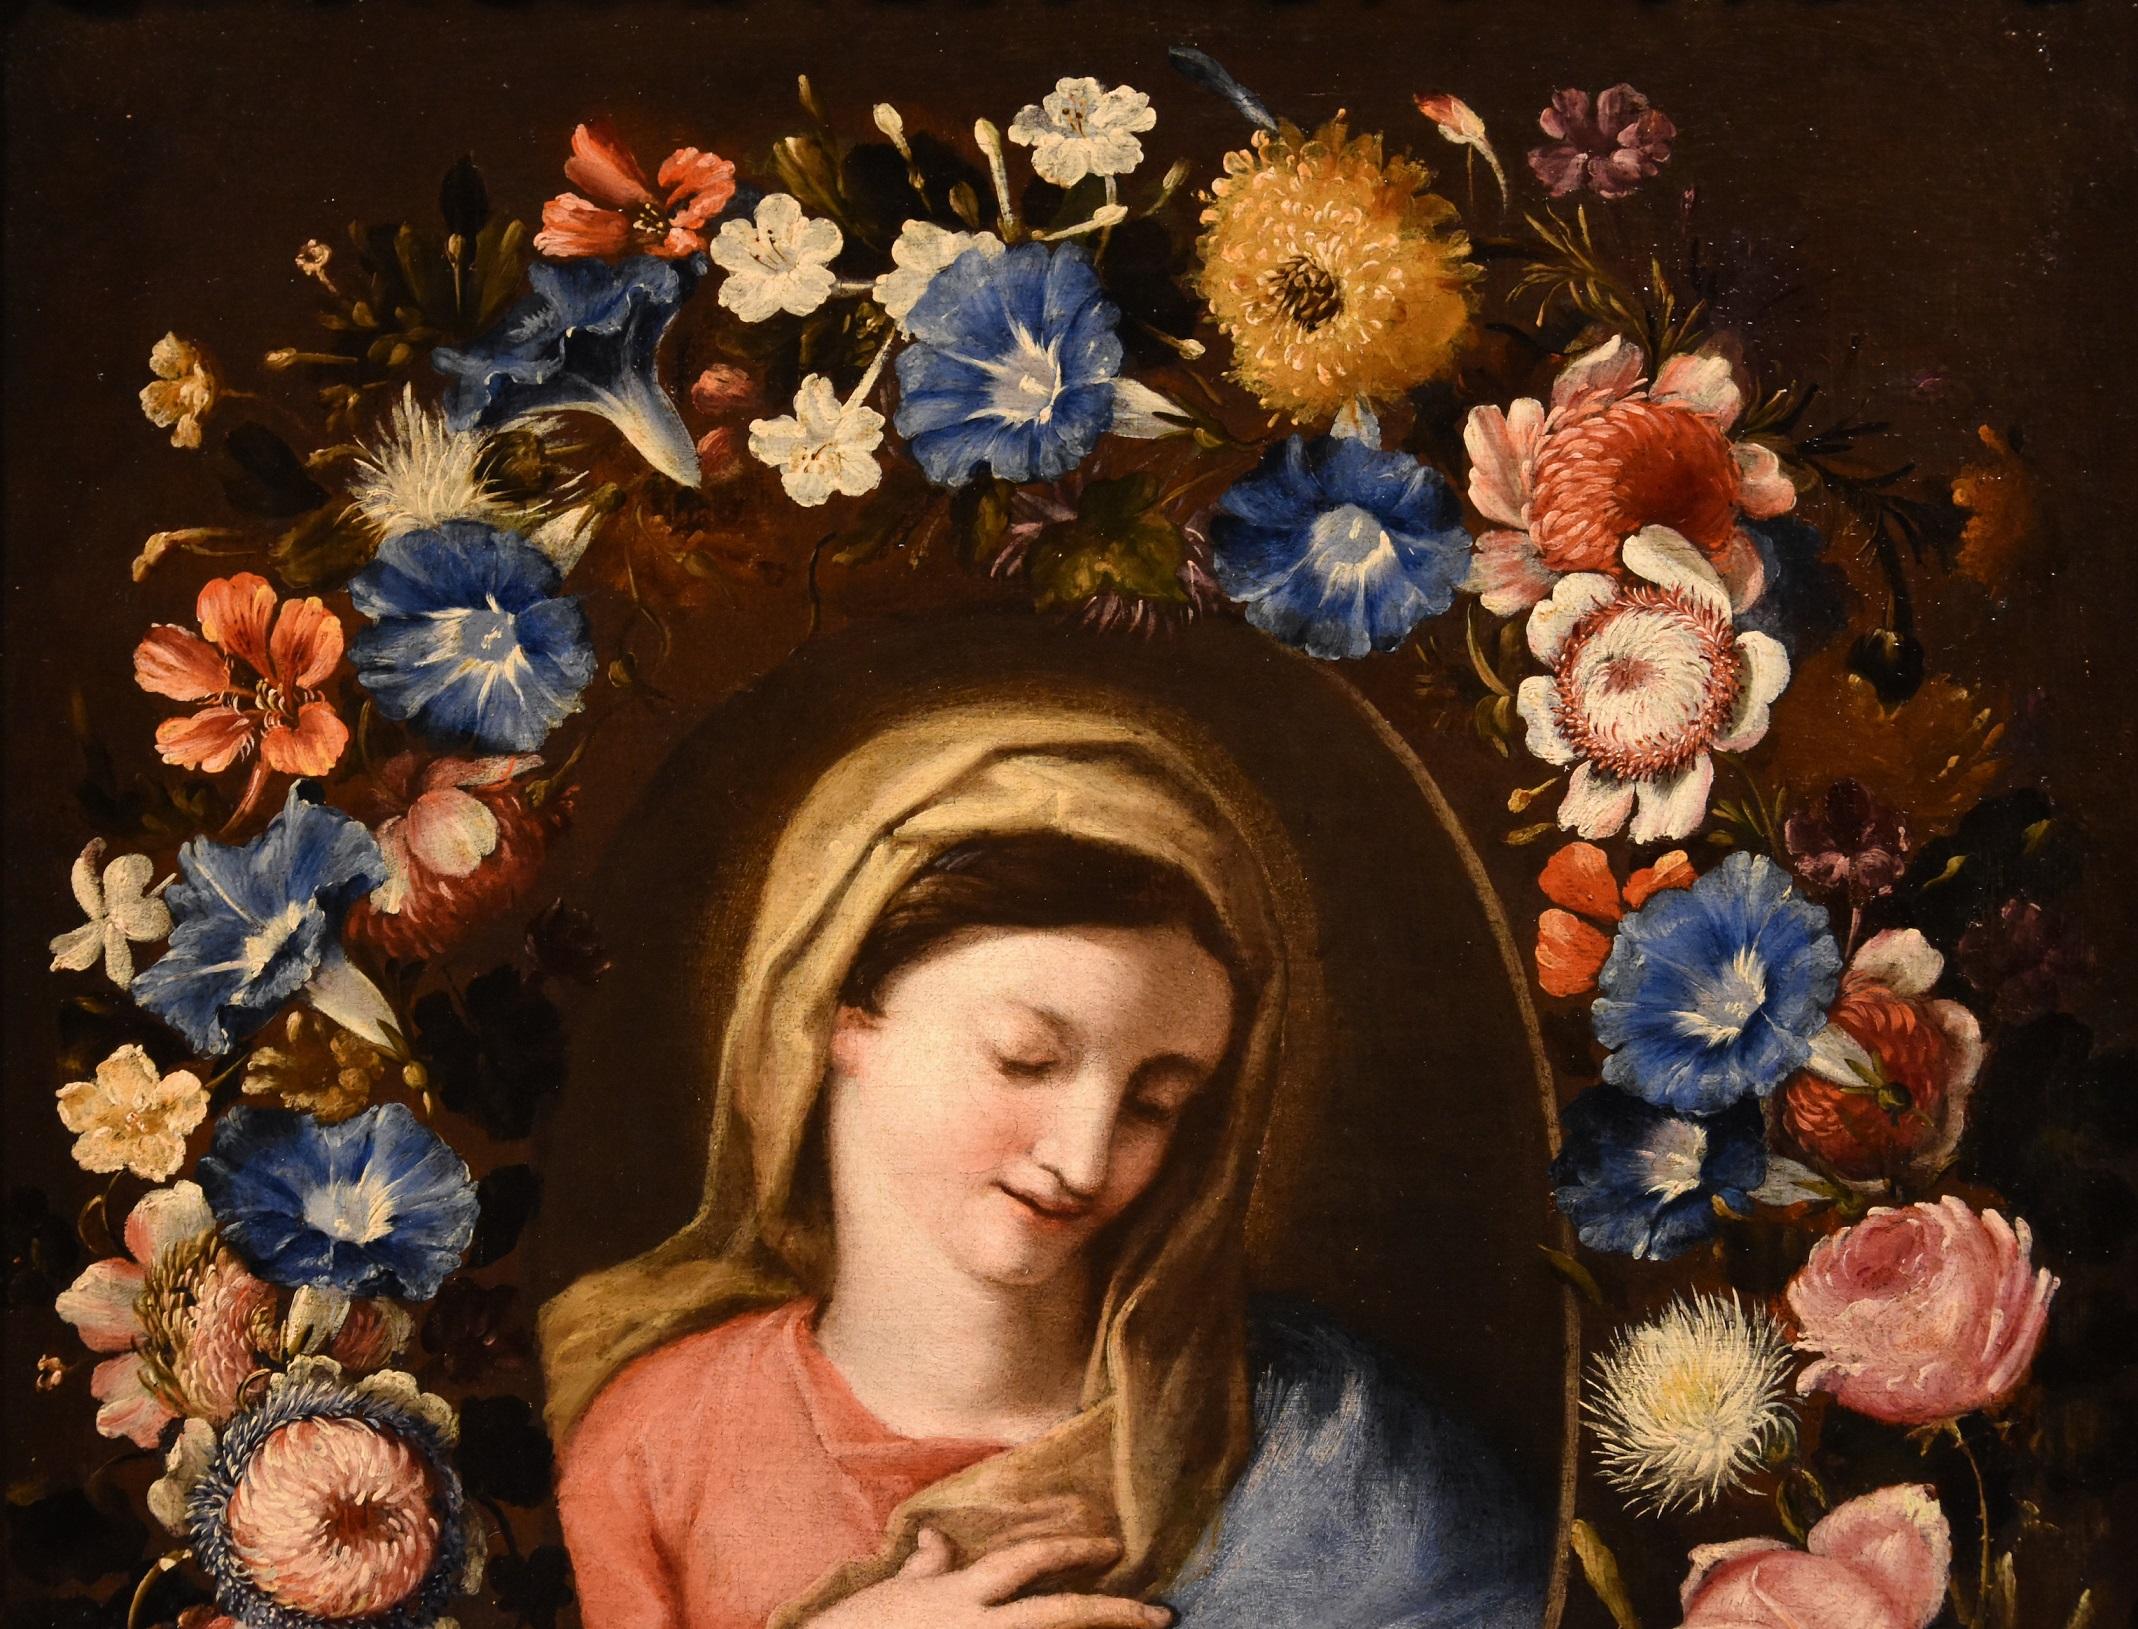 Flower garland with a portrait of the Virgin
Francesco Trevisani (Capodistria 1656 - Rome 1746) and Niccolò Stanchi (Rome 1623 - 1690), attributable

Oil on canvas
66 x 49 cm. - In frame 76 X 60 cm.

The beautiful painting that we are pleased to